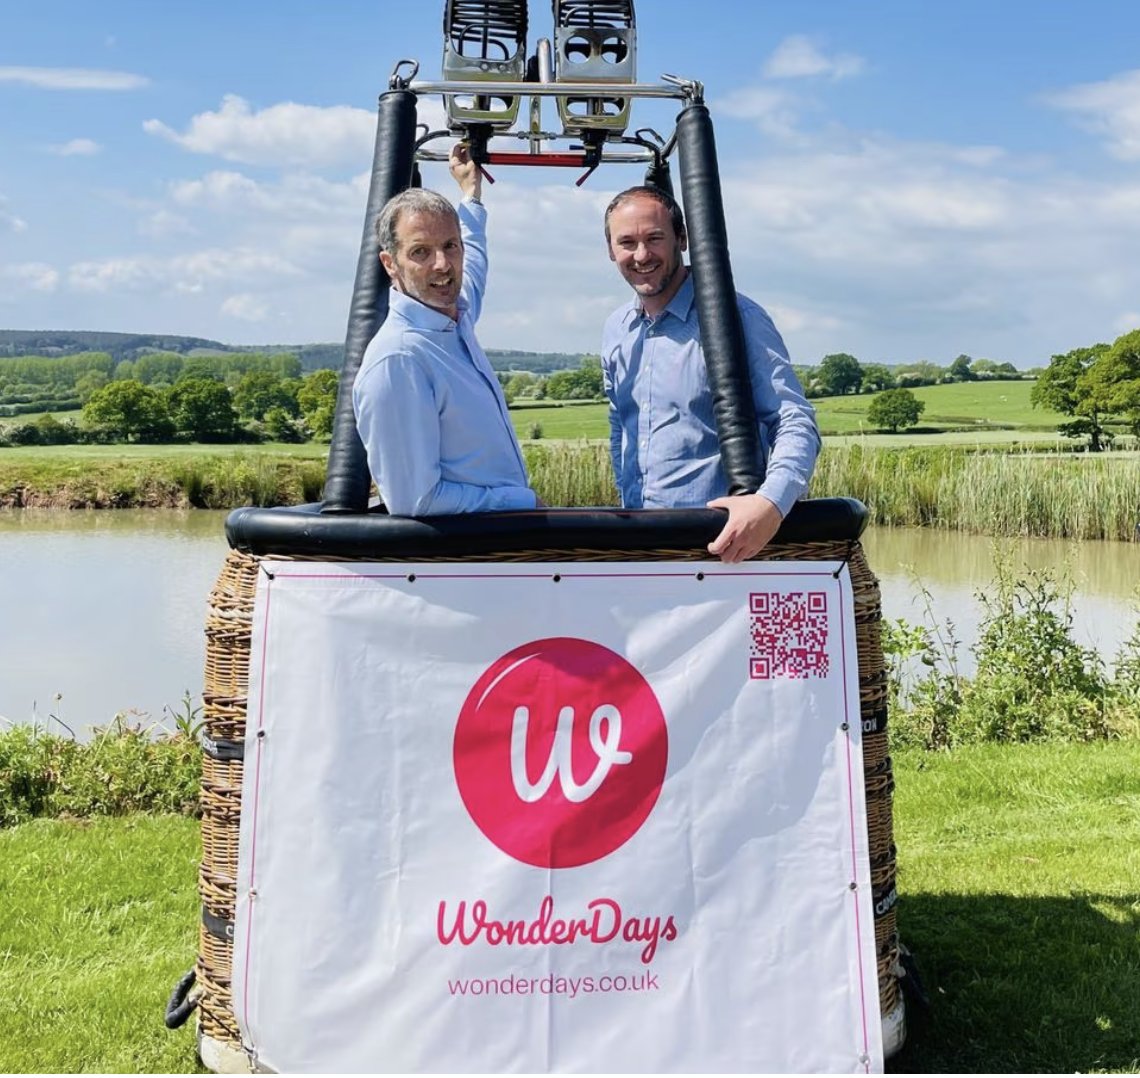 See the skies with us and you'll be flying with the UK's largest hot air balloon flight operator thanks to our recent acquisition!  Read more in Shropshire Star bit.ly/3C8egPJ & Essex Magazine bit.ly/3OQjDus
#hotairballoons #shropshirebusiness #telfordbusiness